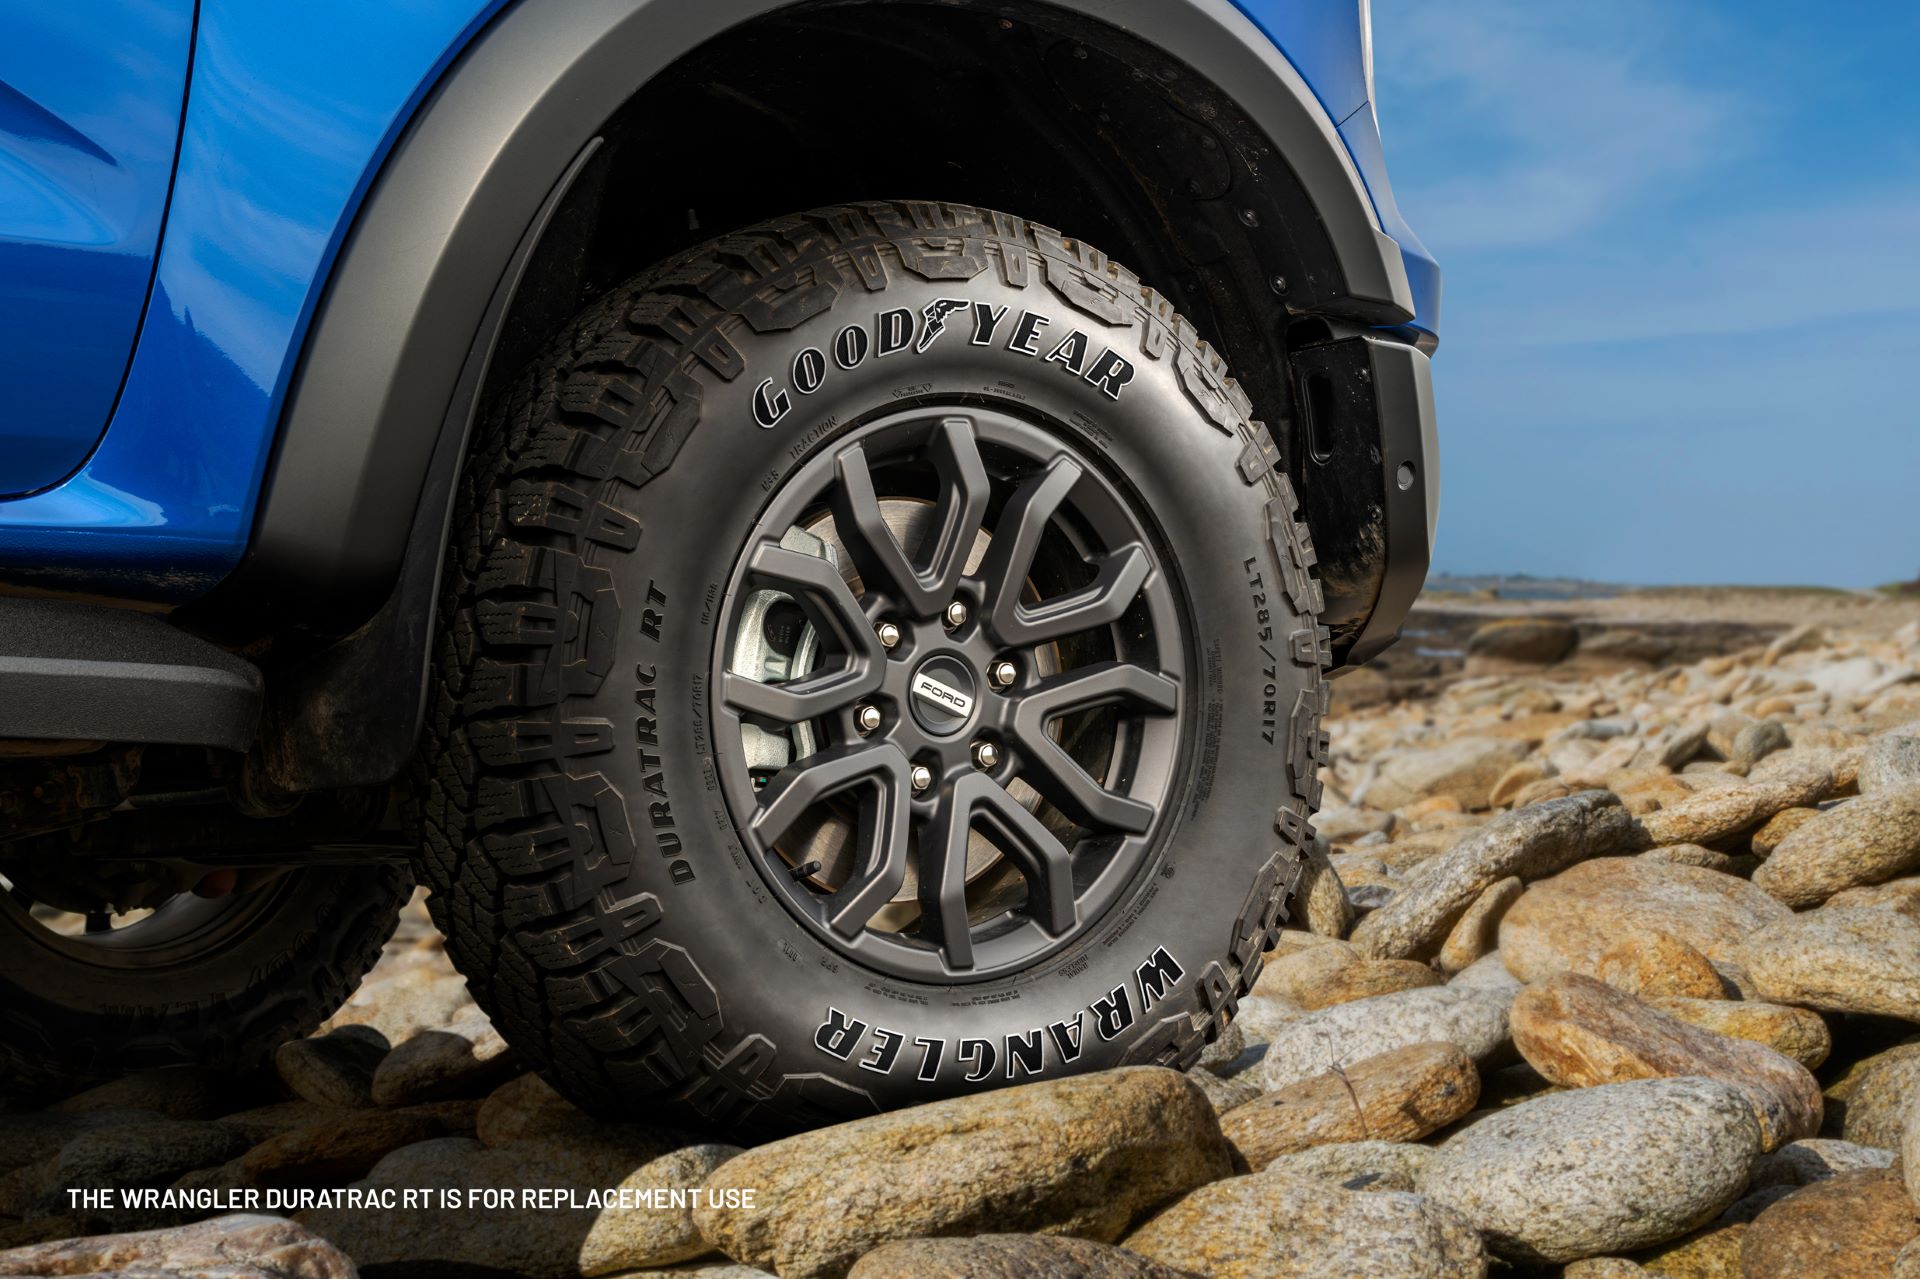 South African Retailers Endorse Goodyear’s Wrangler Duratrac RT for Outstanding Performance and Value